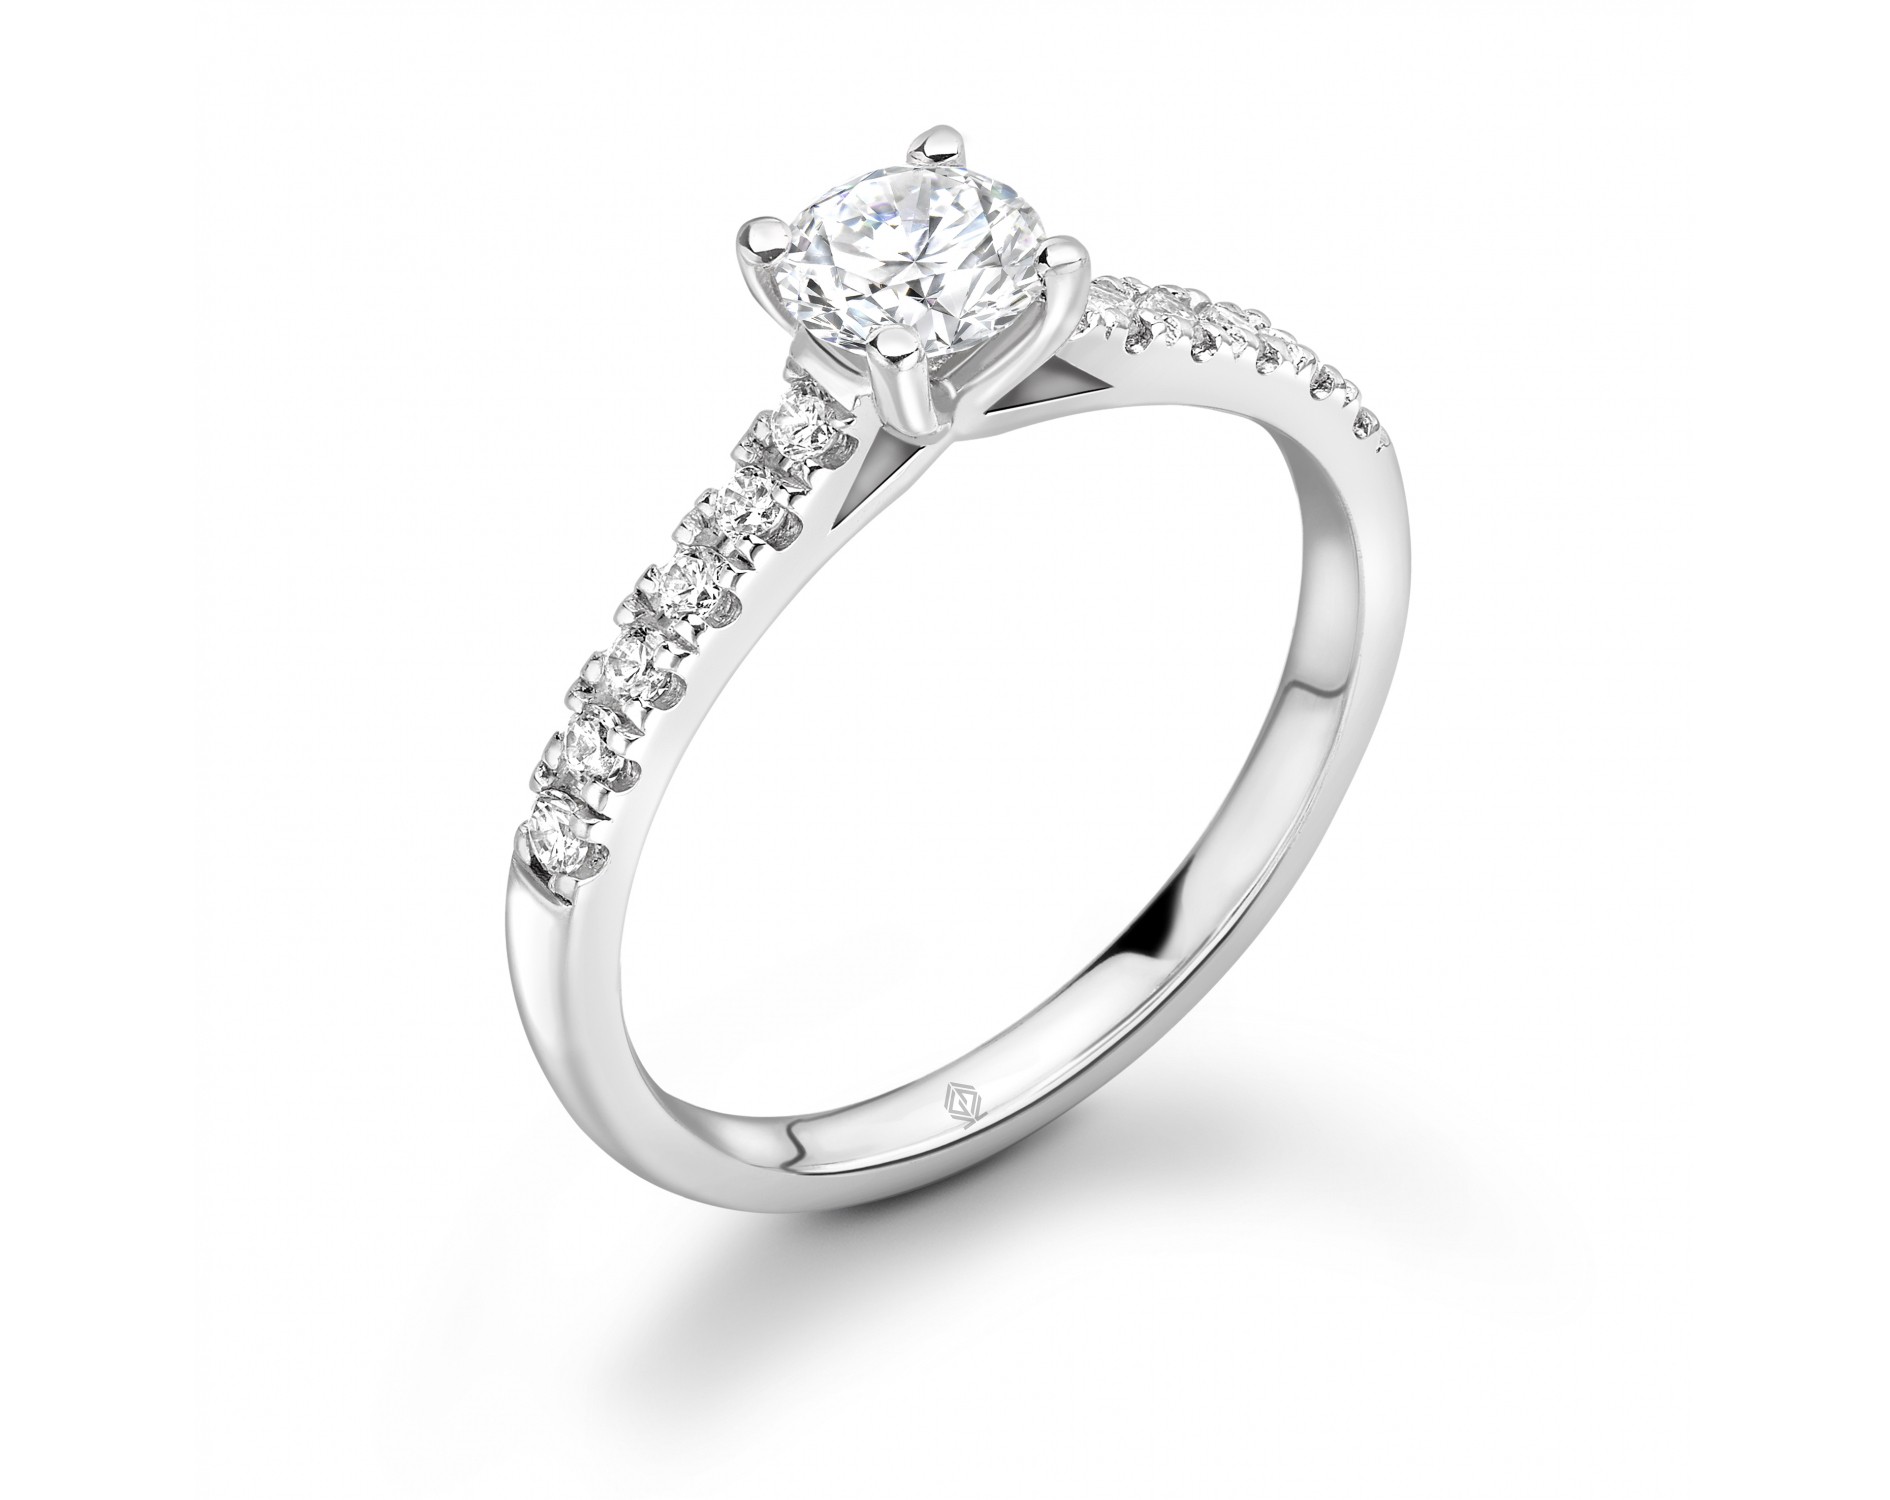 18K WHITE GOLD ROUND CUT 4 PRONGS DIAMOND ENGAGEMENT RING WITH PAVE SET